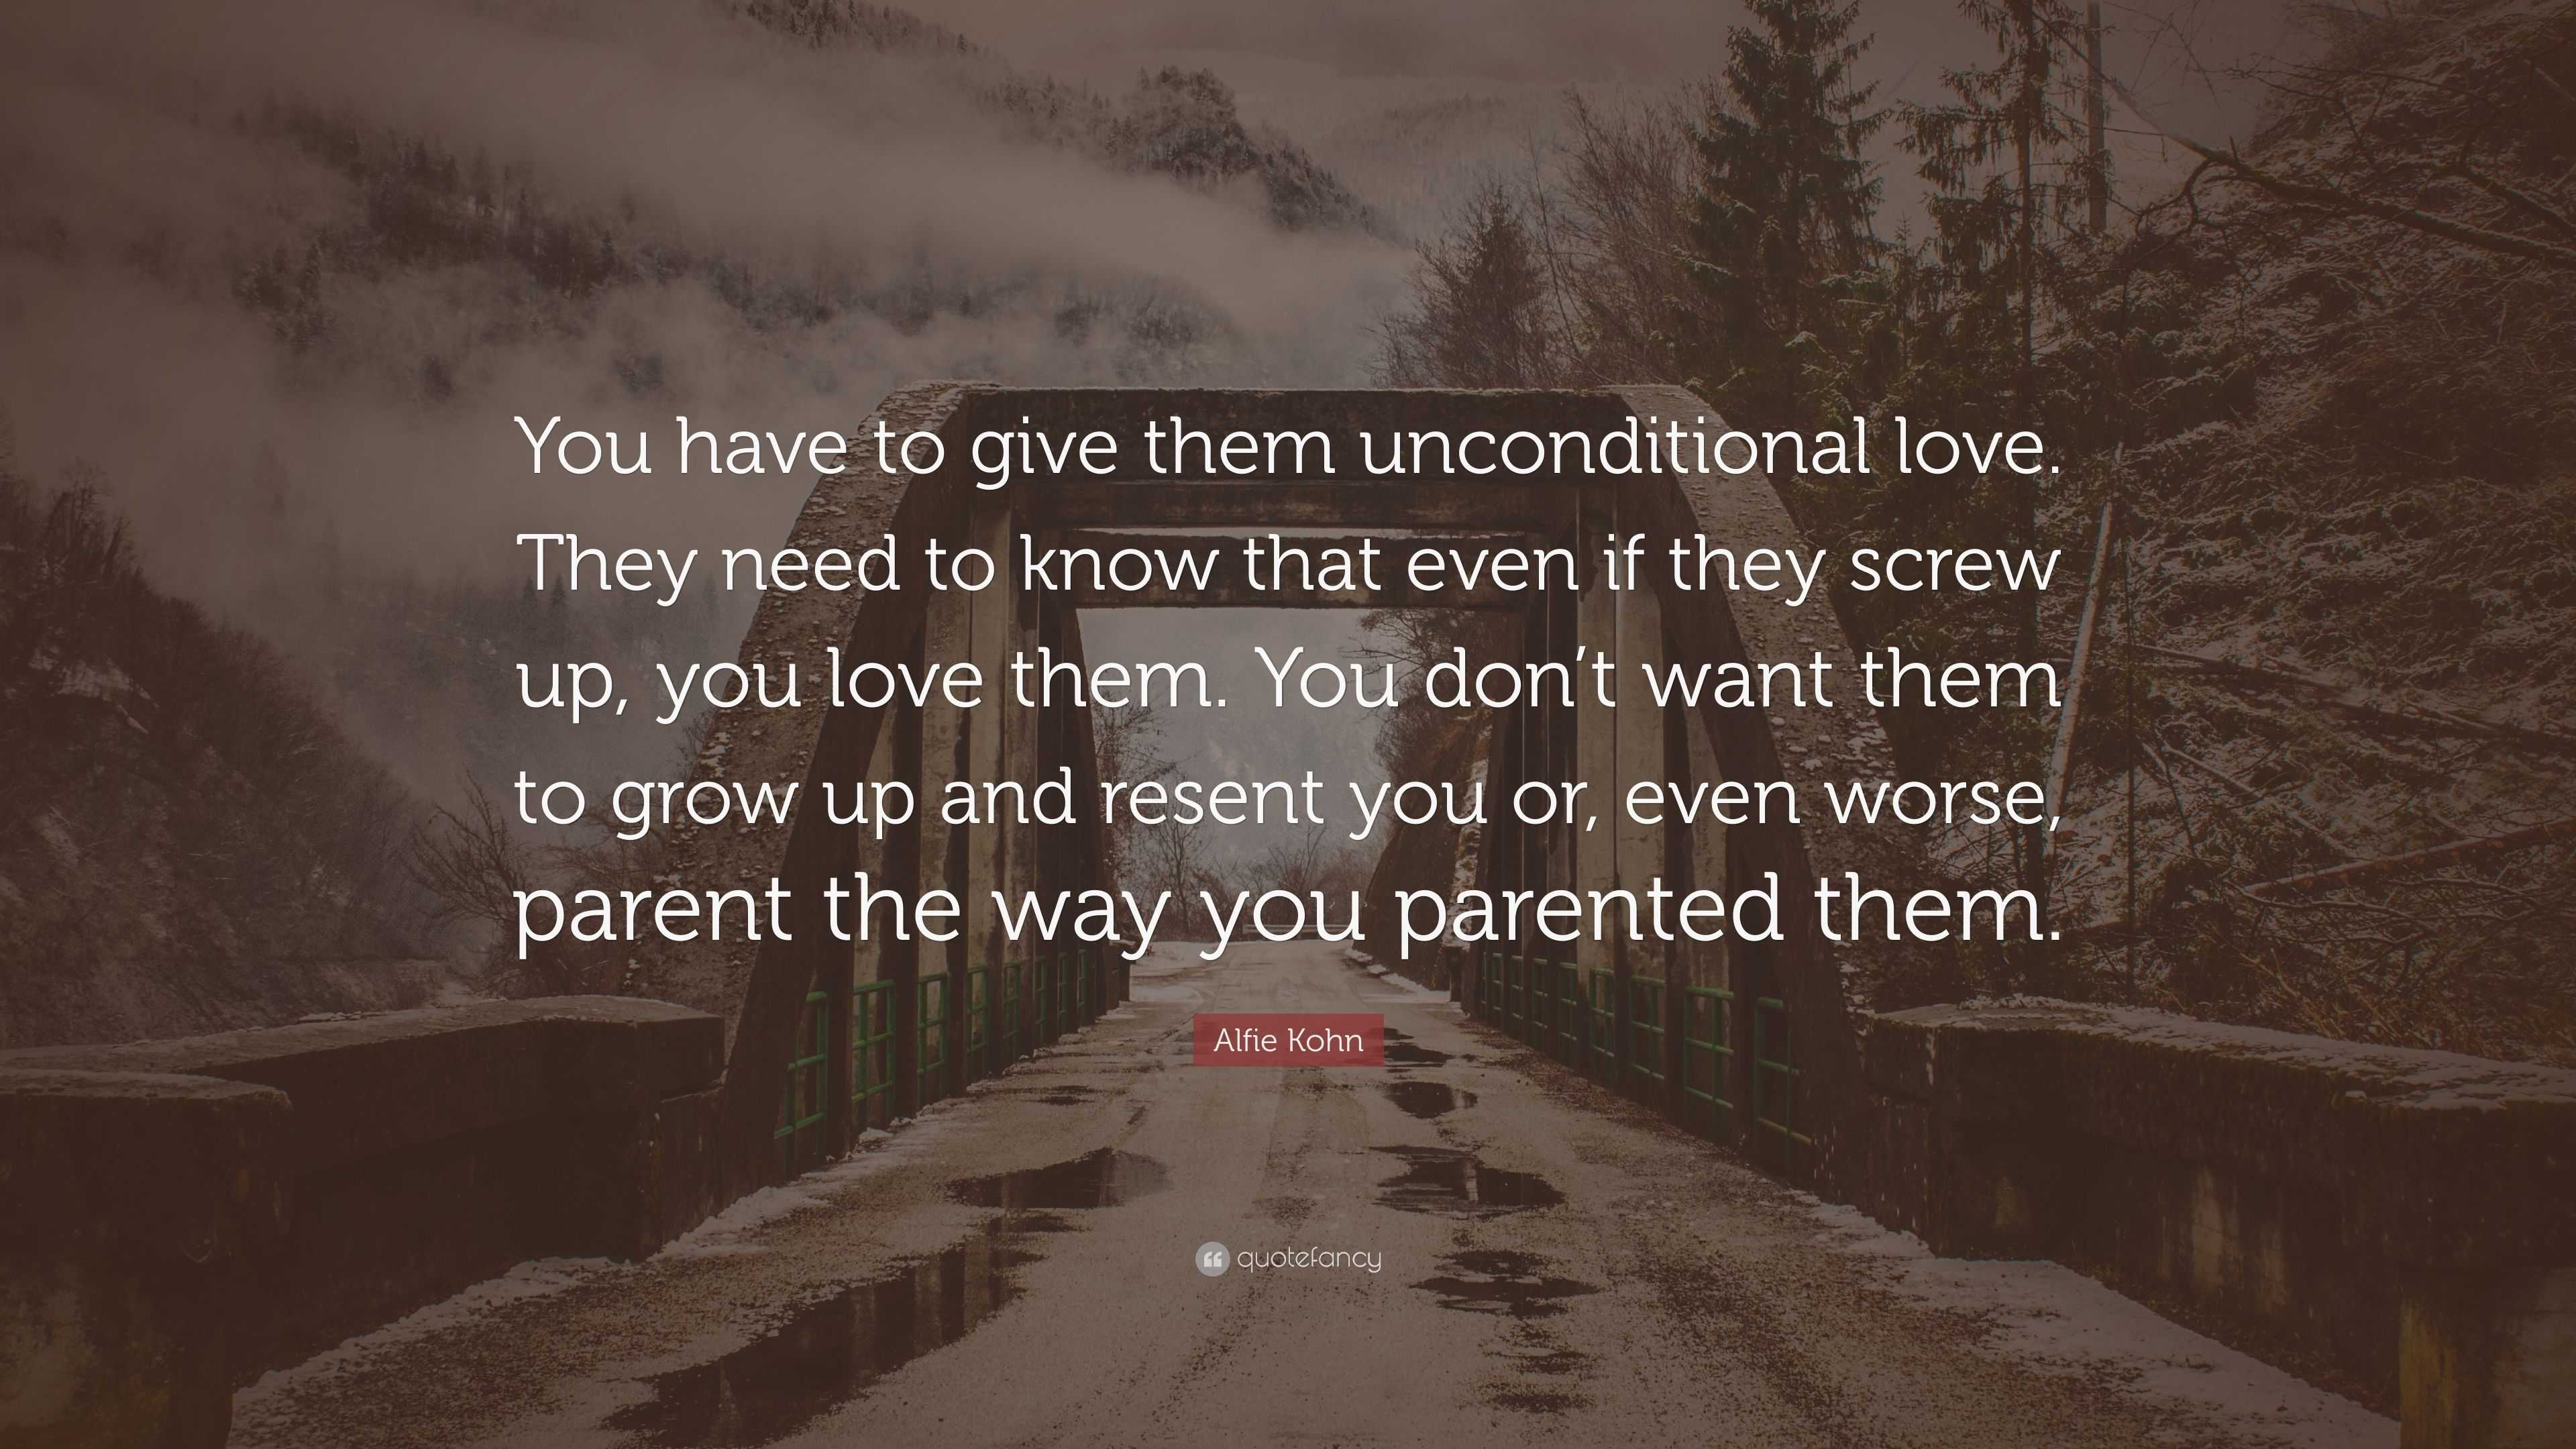 Alfie Kohn Quote: “You have to give them unconditional love. They need ...